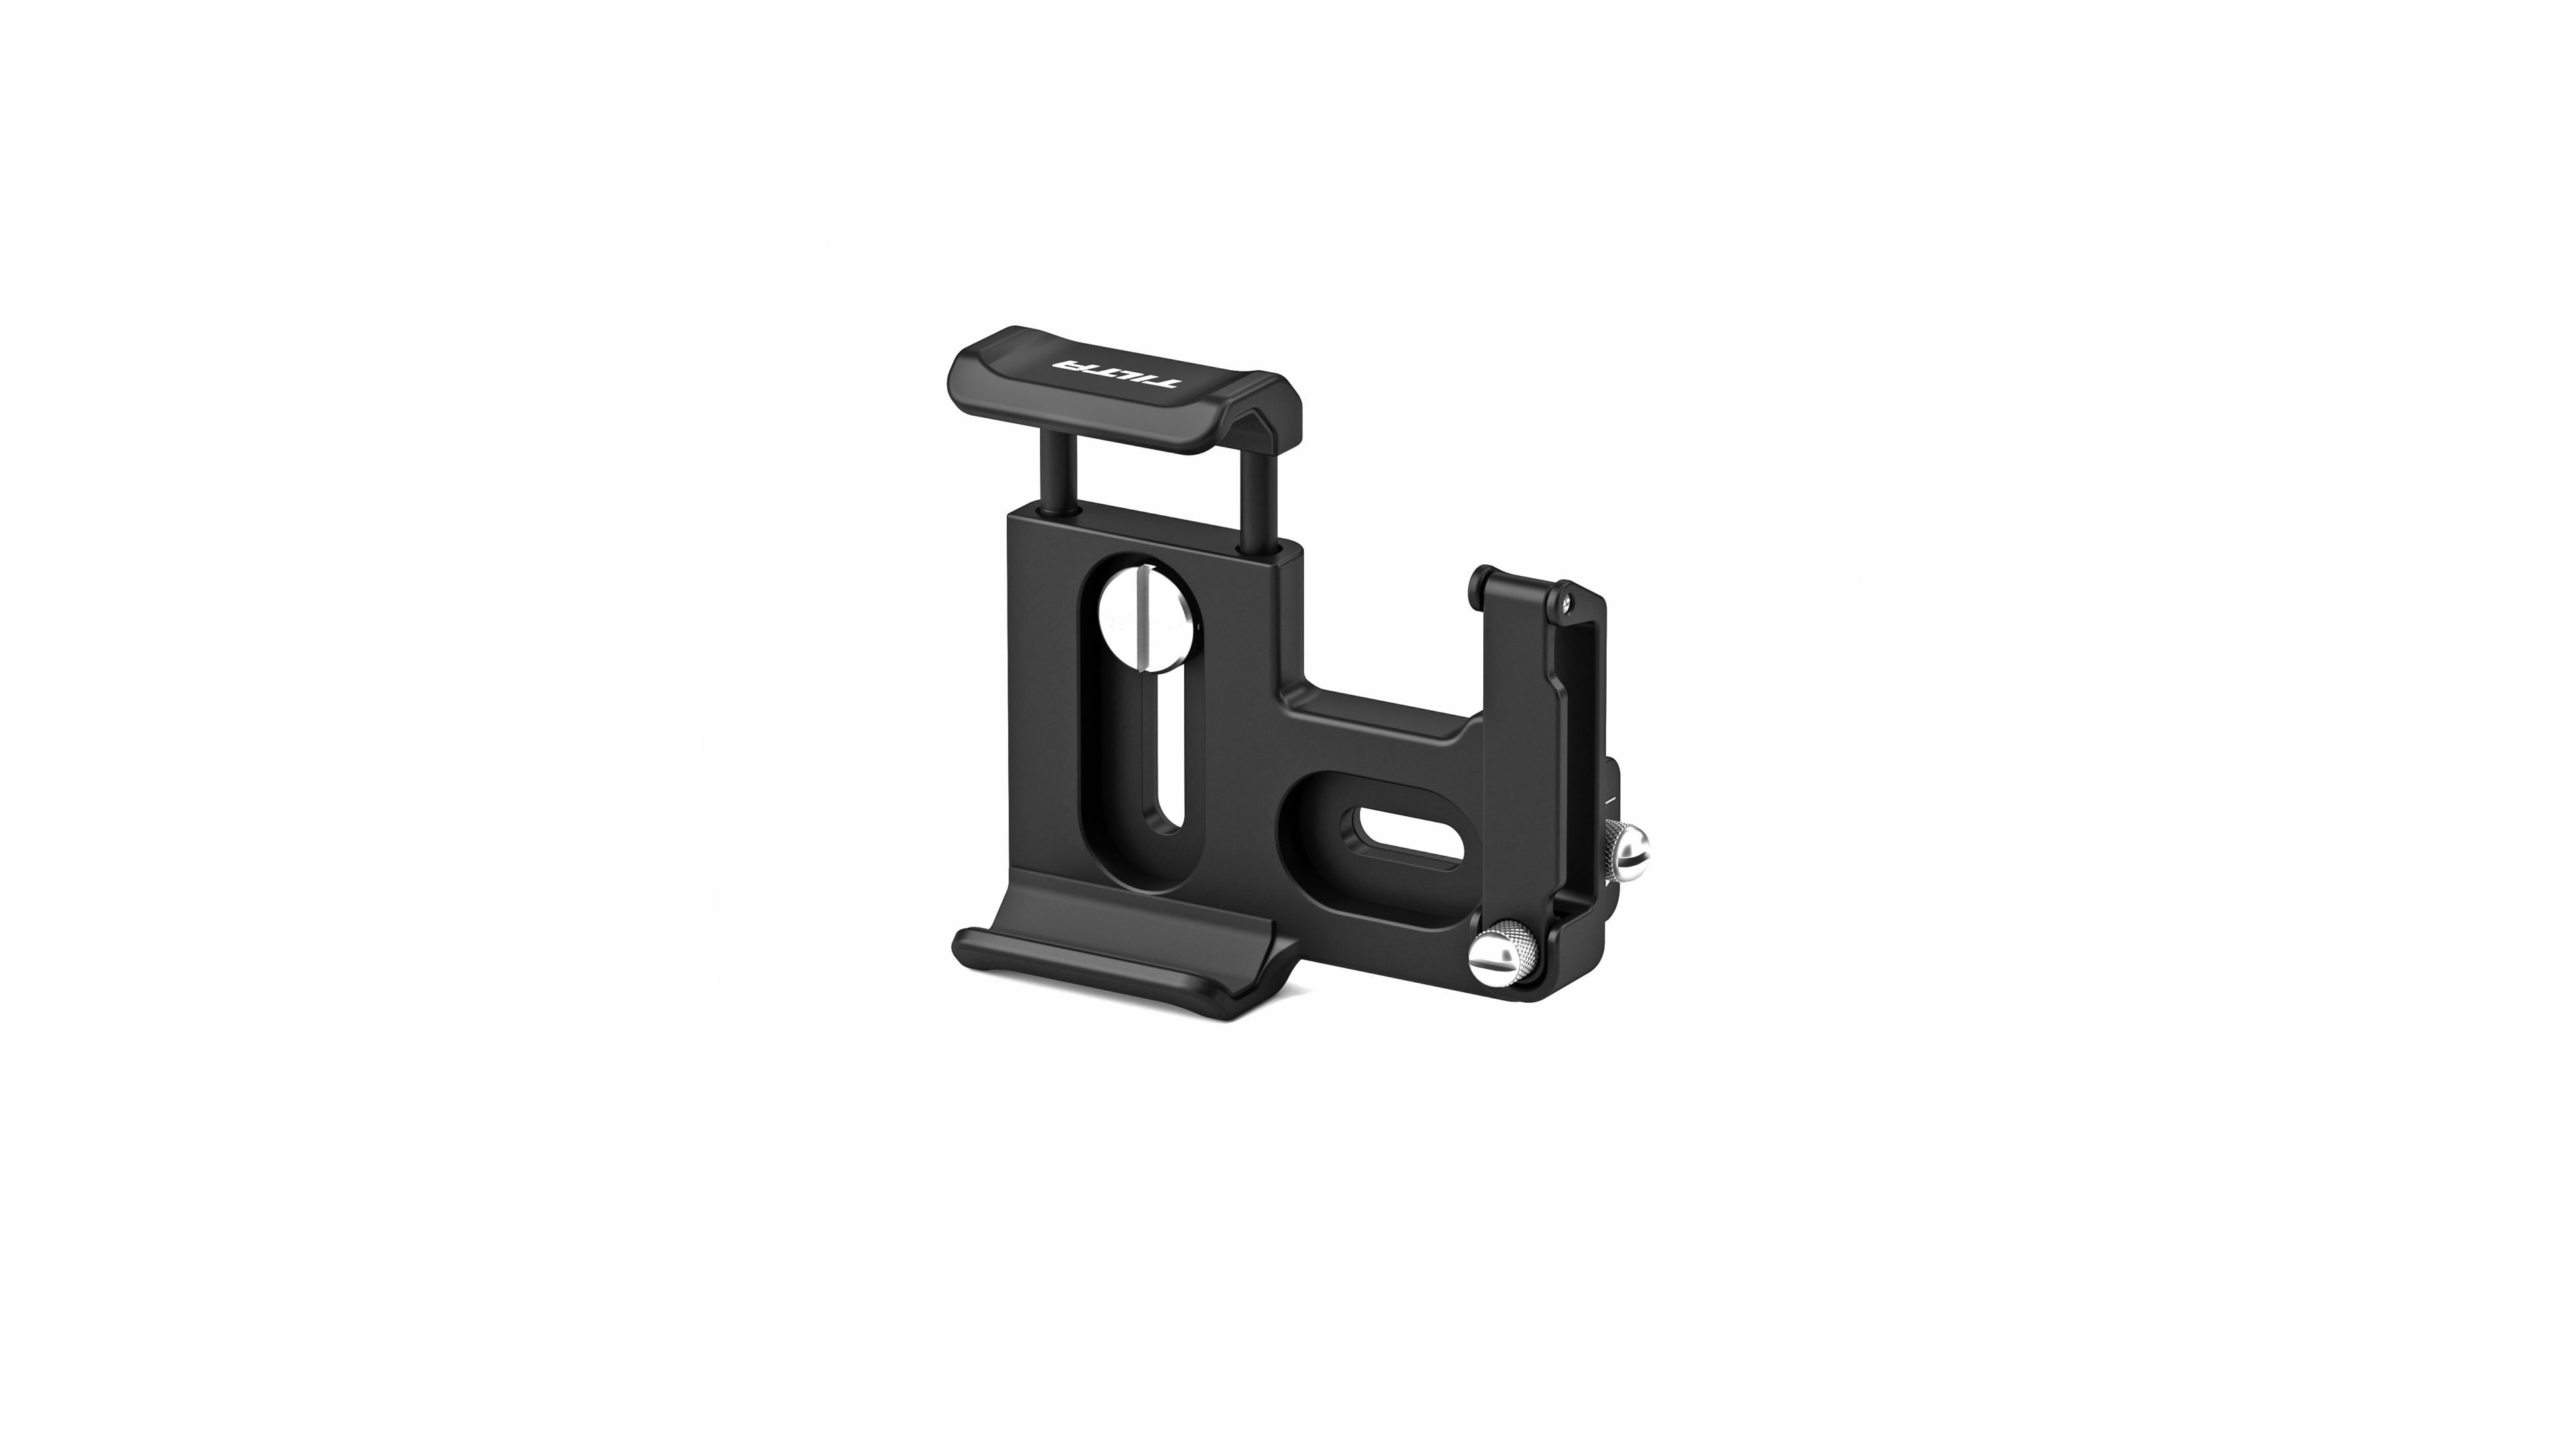 SMALLRIG Mount Bracket SSD Holder for Samsung T5 SSD with 1/4”-20 Threads,  Compatible with SMALLRIG Cage for BMPCC 4K & 6K and for Z CAM (New Version)